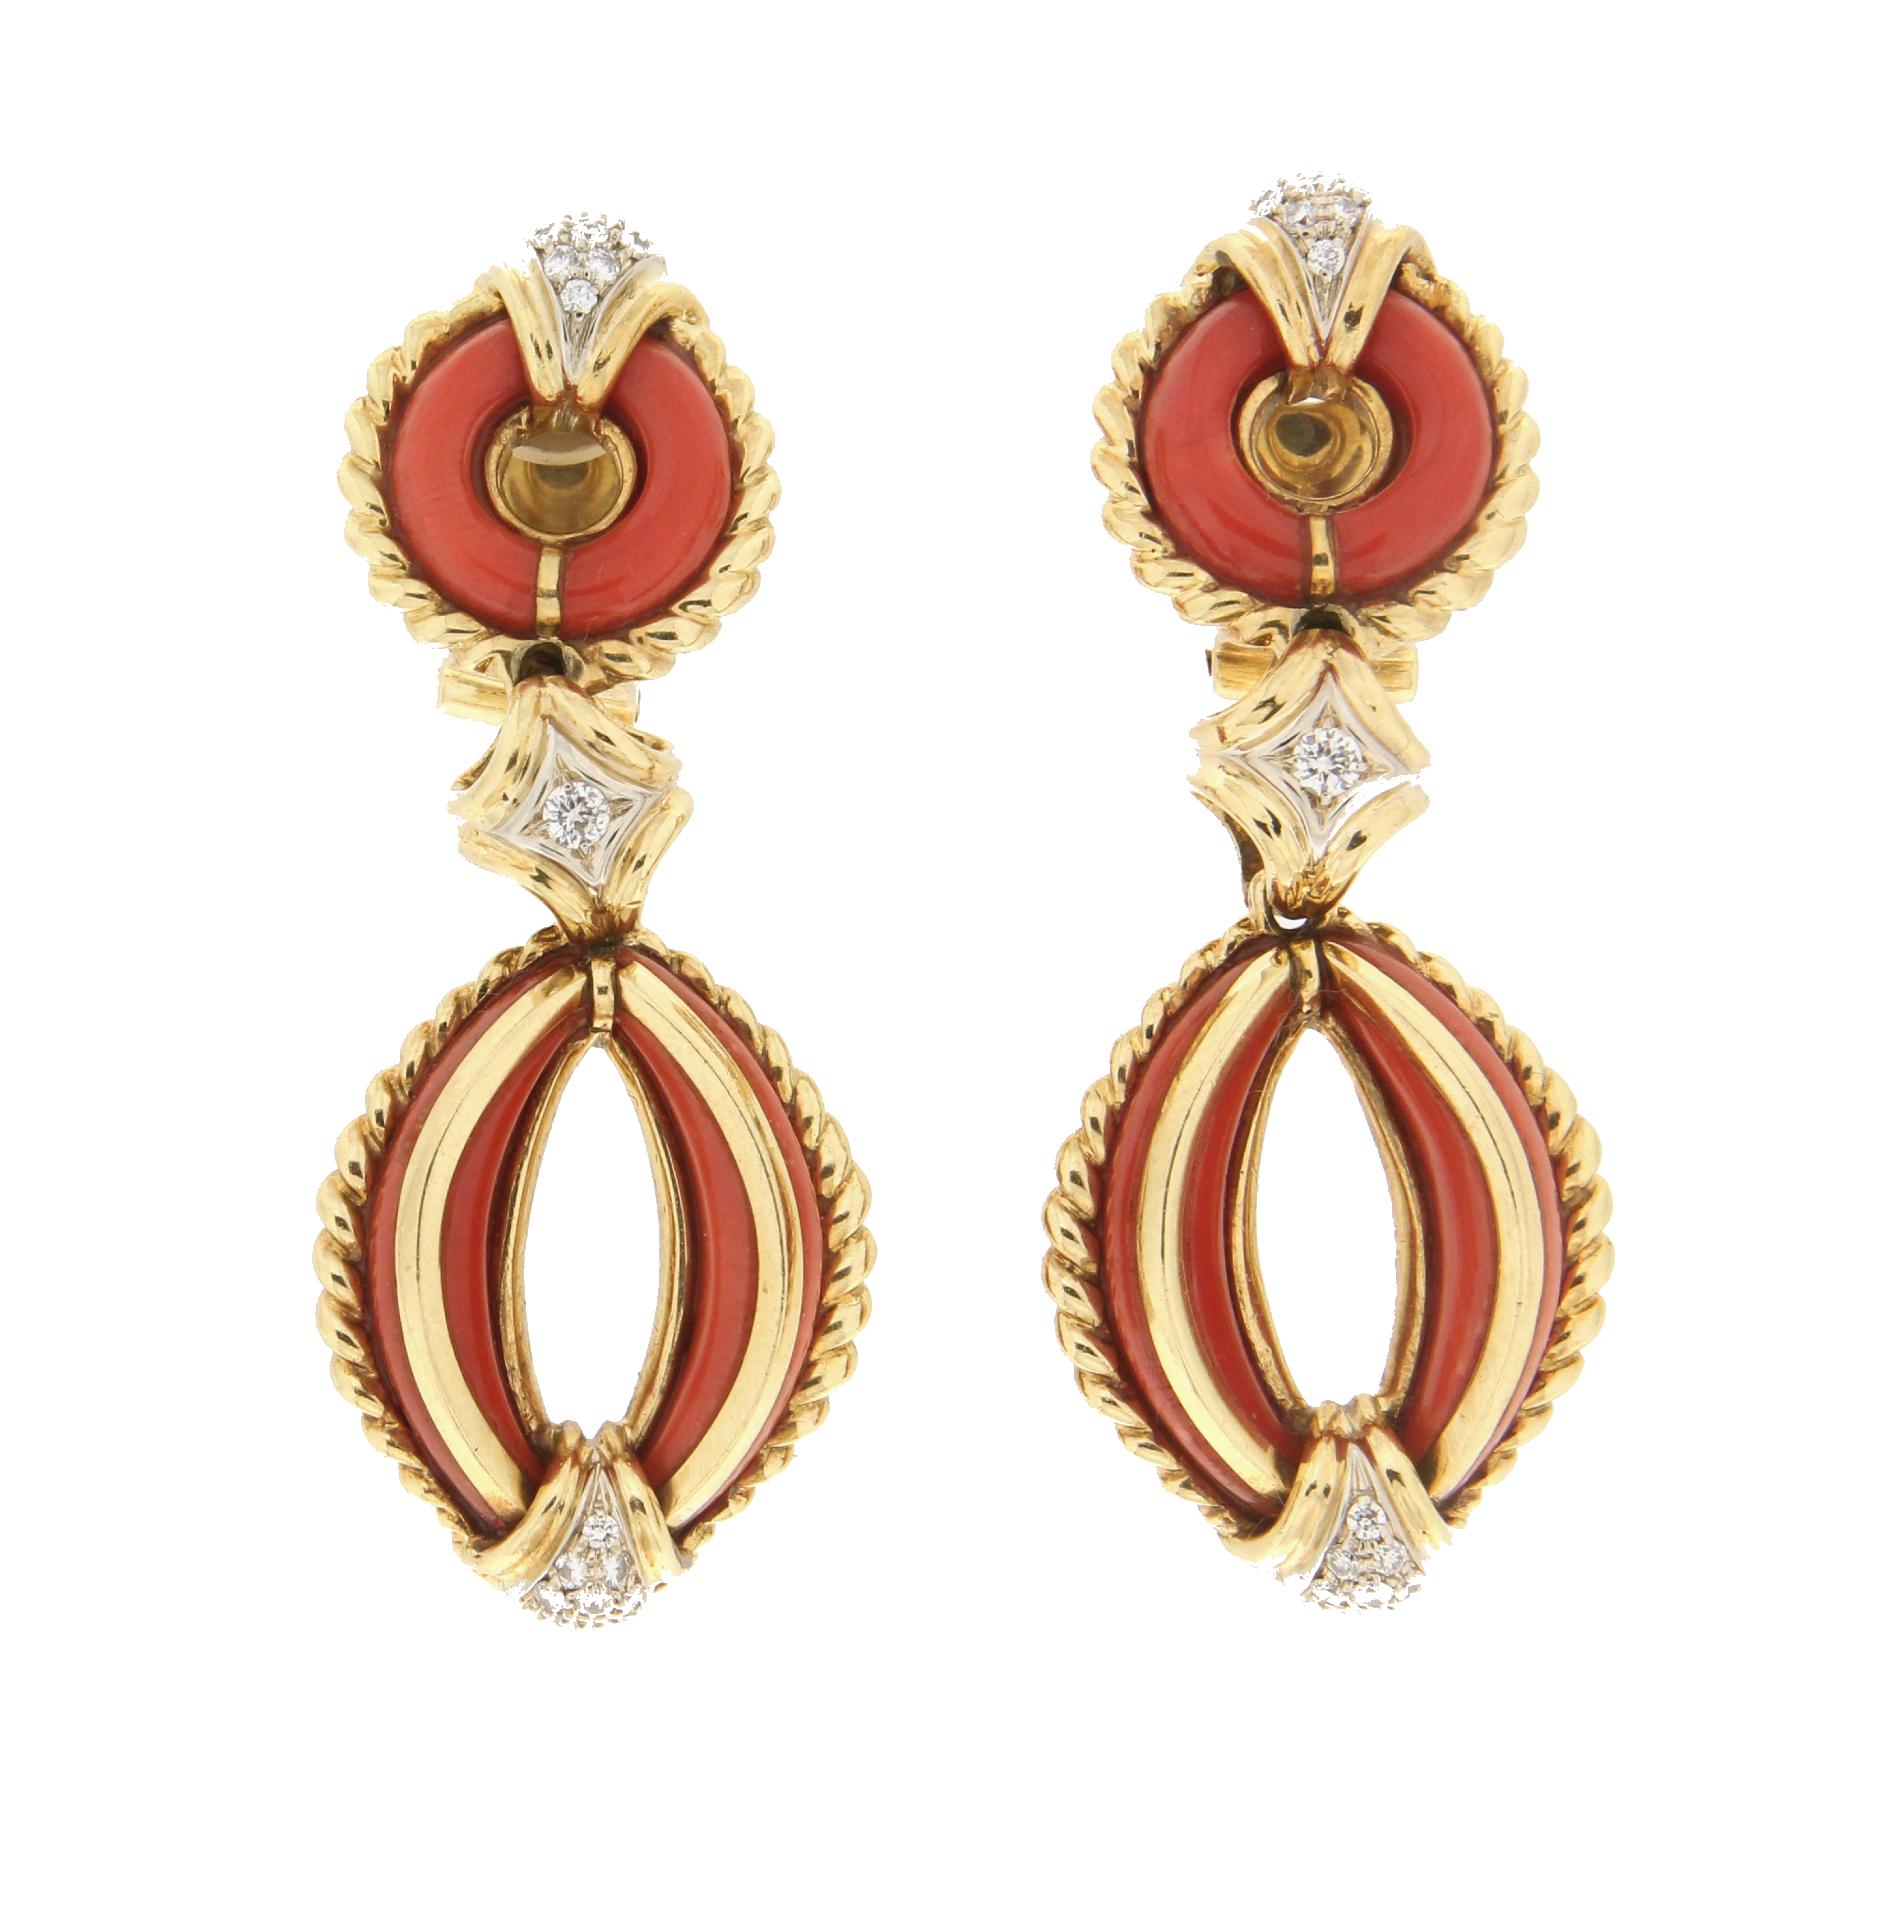 Brilliant Cut Handcraft Sardinian Coral 18 Karat Yellow Gold Clip-On Earrings For Sale